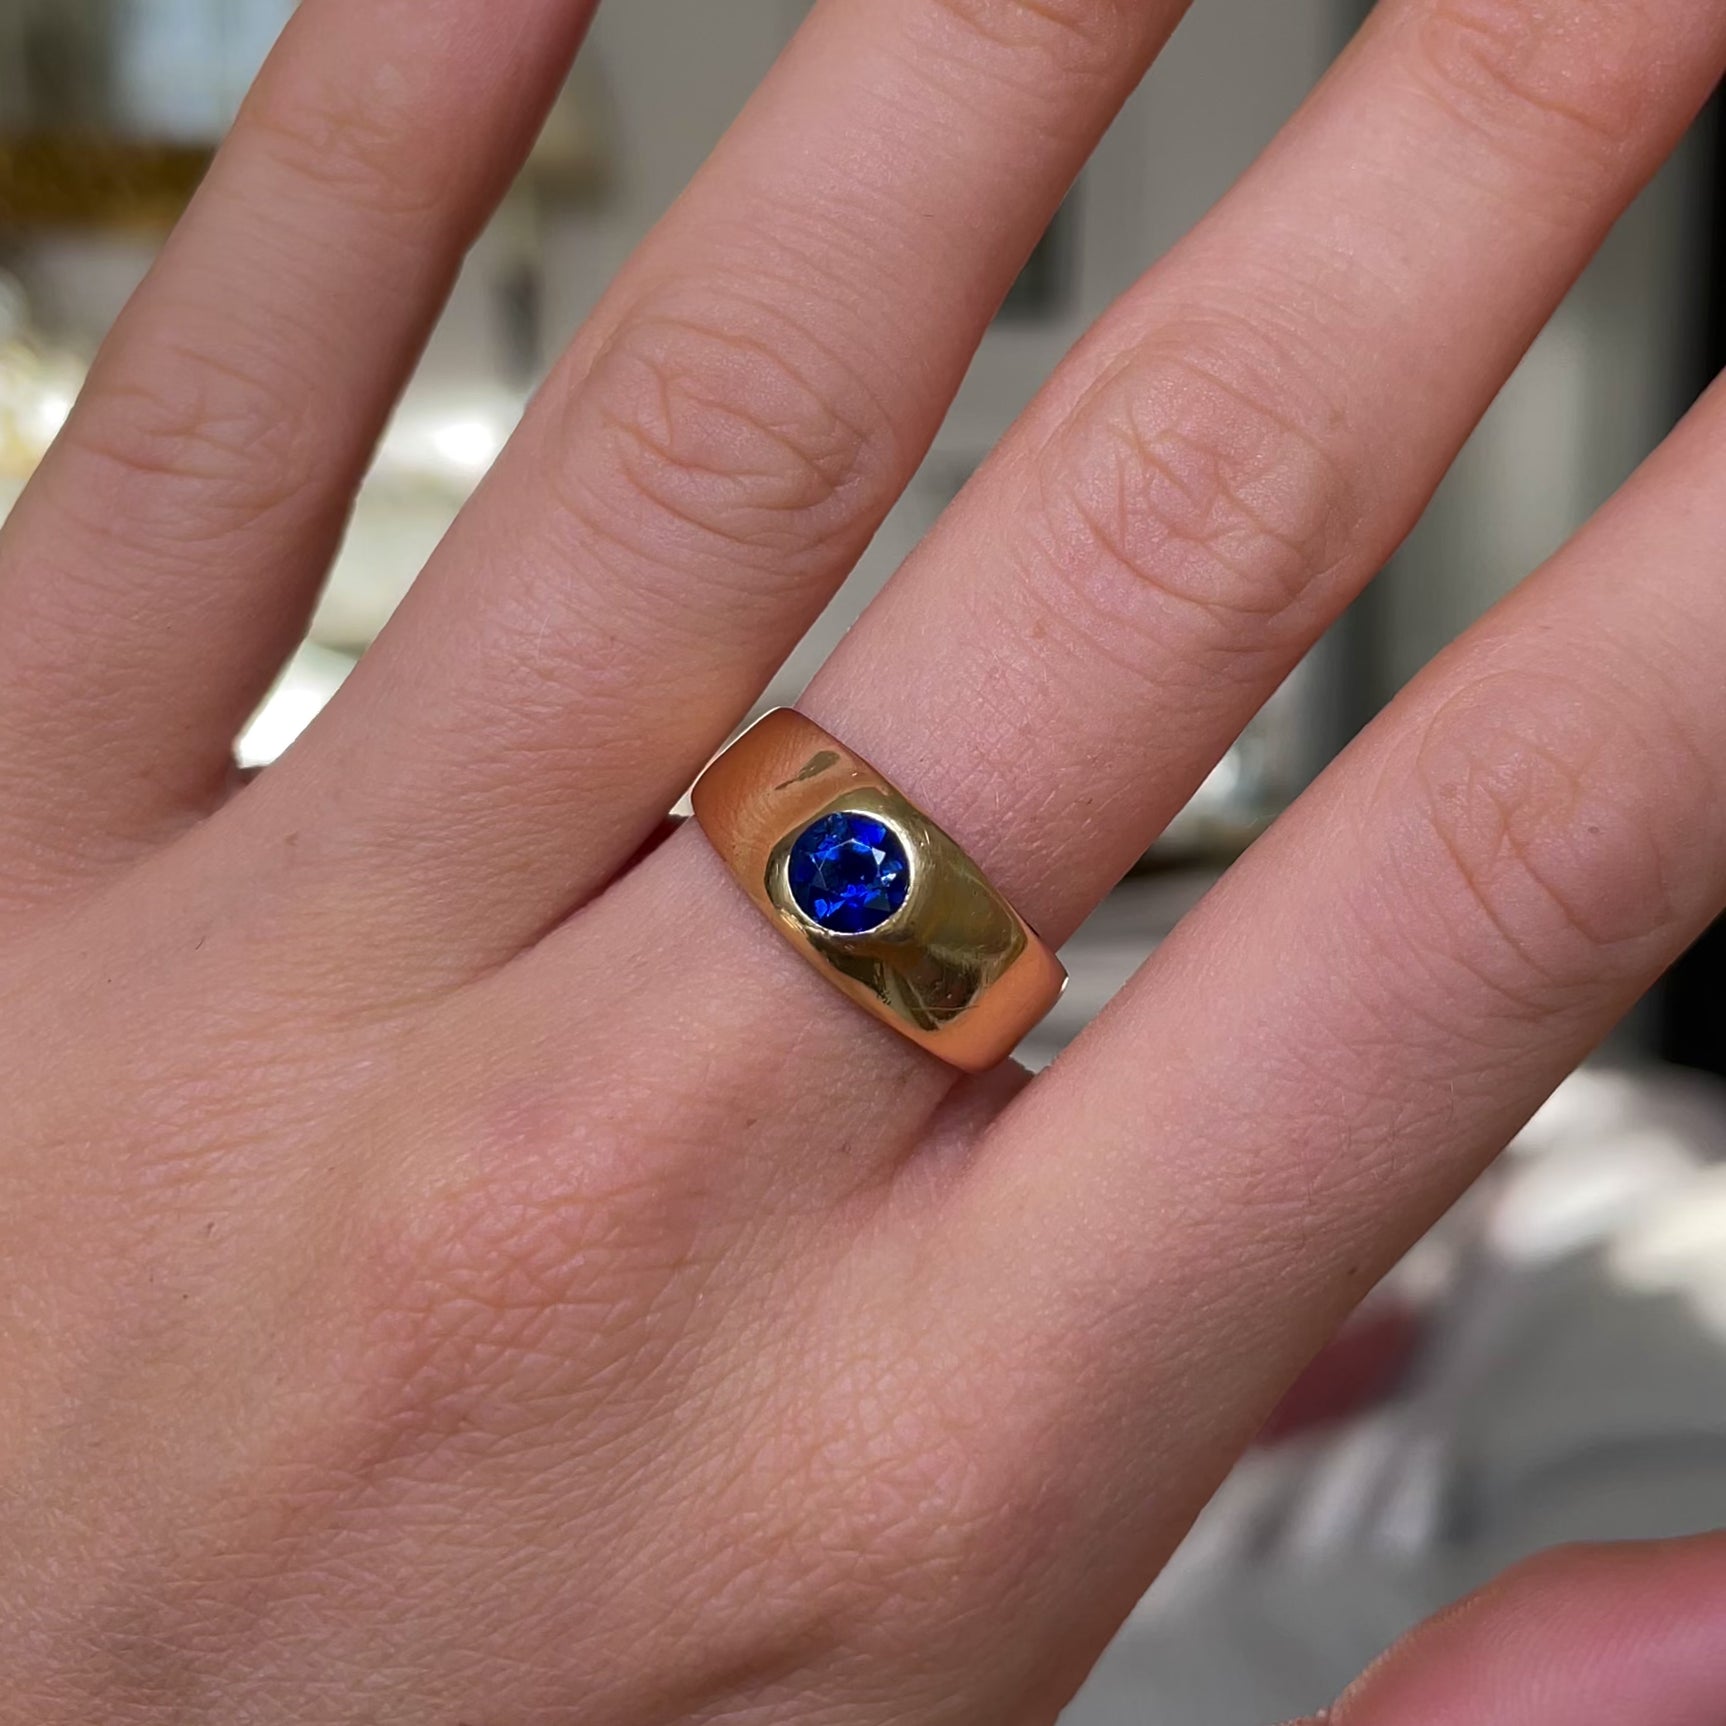 Victorian Burmese sapphire engagement ring, worn on hand and moved around to give perspective.